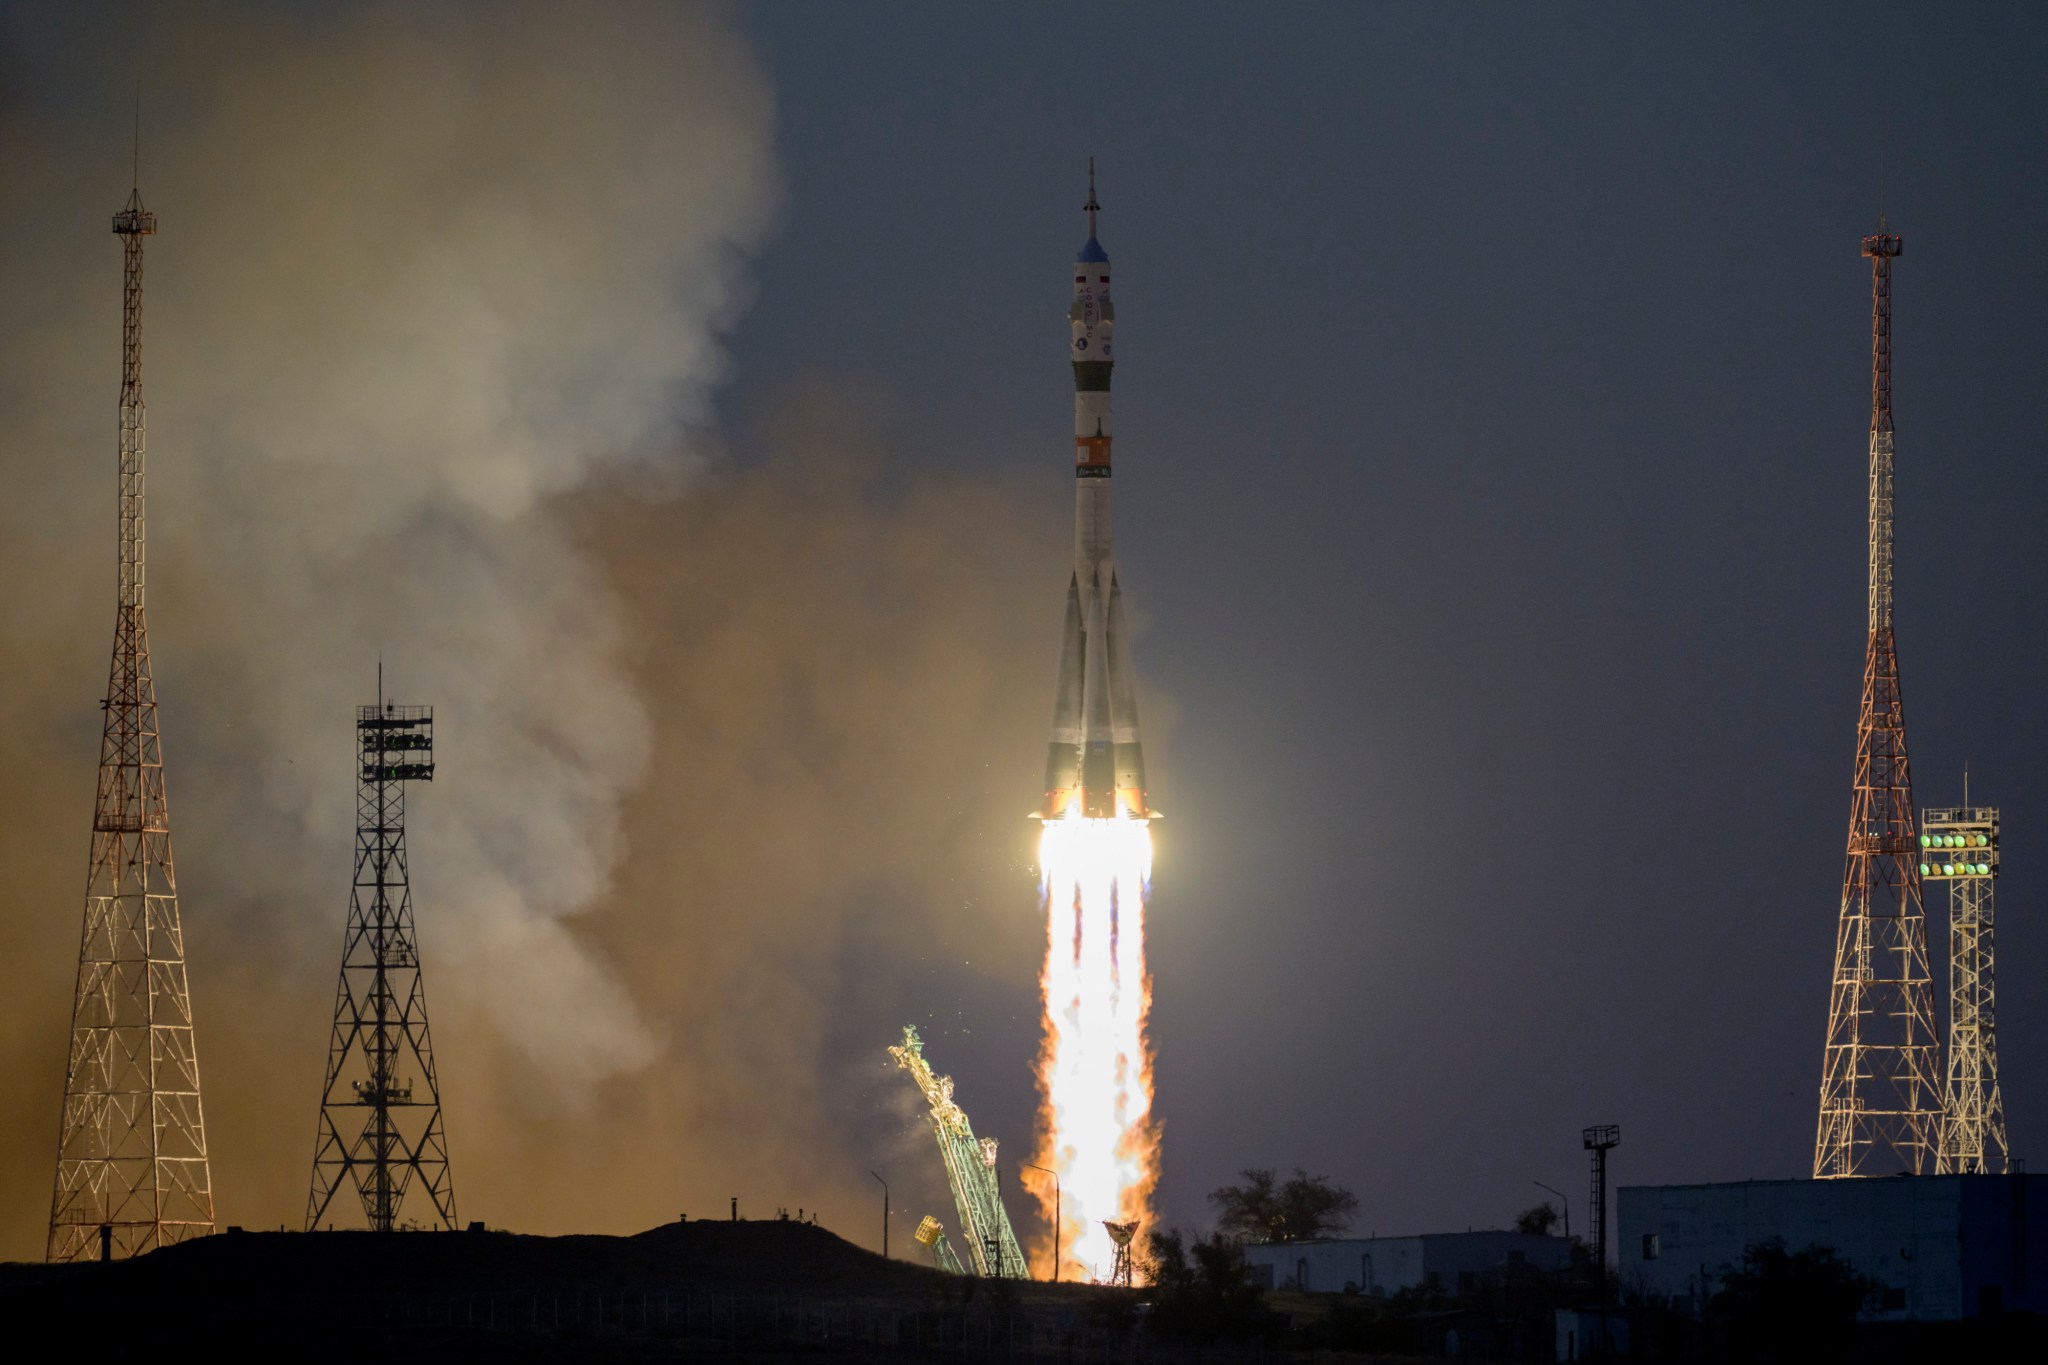 The Soyuz MS-22 rocket launches to the International Space Station with Expedition 68 astronaut Frank Rubio of NASA, and cosmonauts Sergey Prokopyev and Dmitri Petelin of Roscosmos aboard, Wednesday, Sept. 21, 2022.